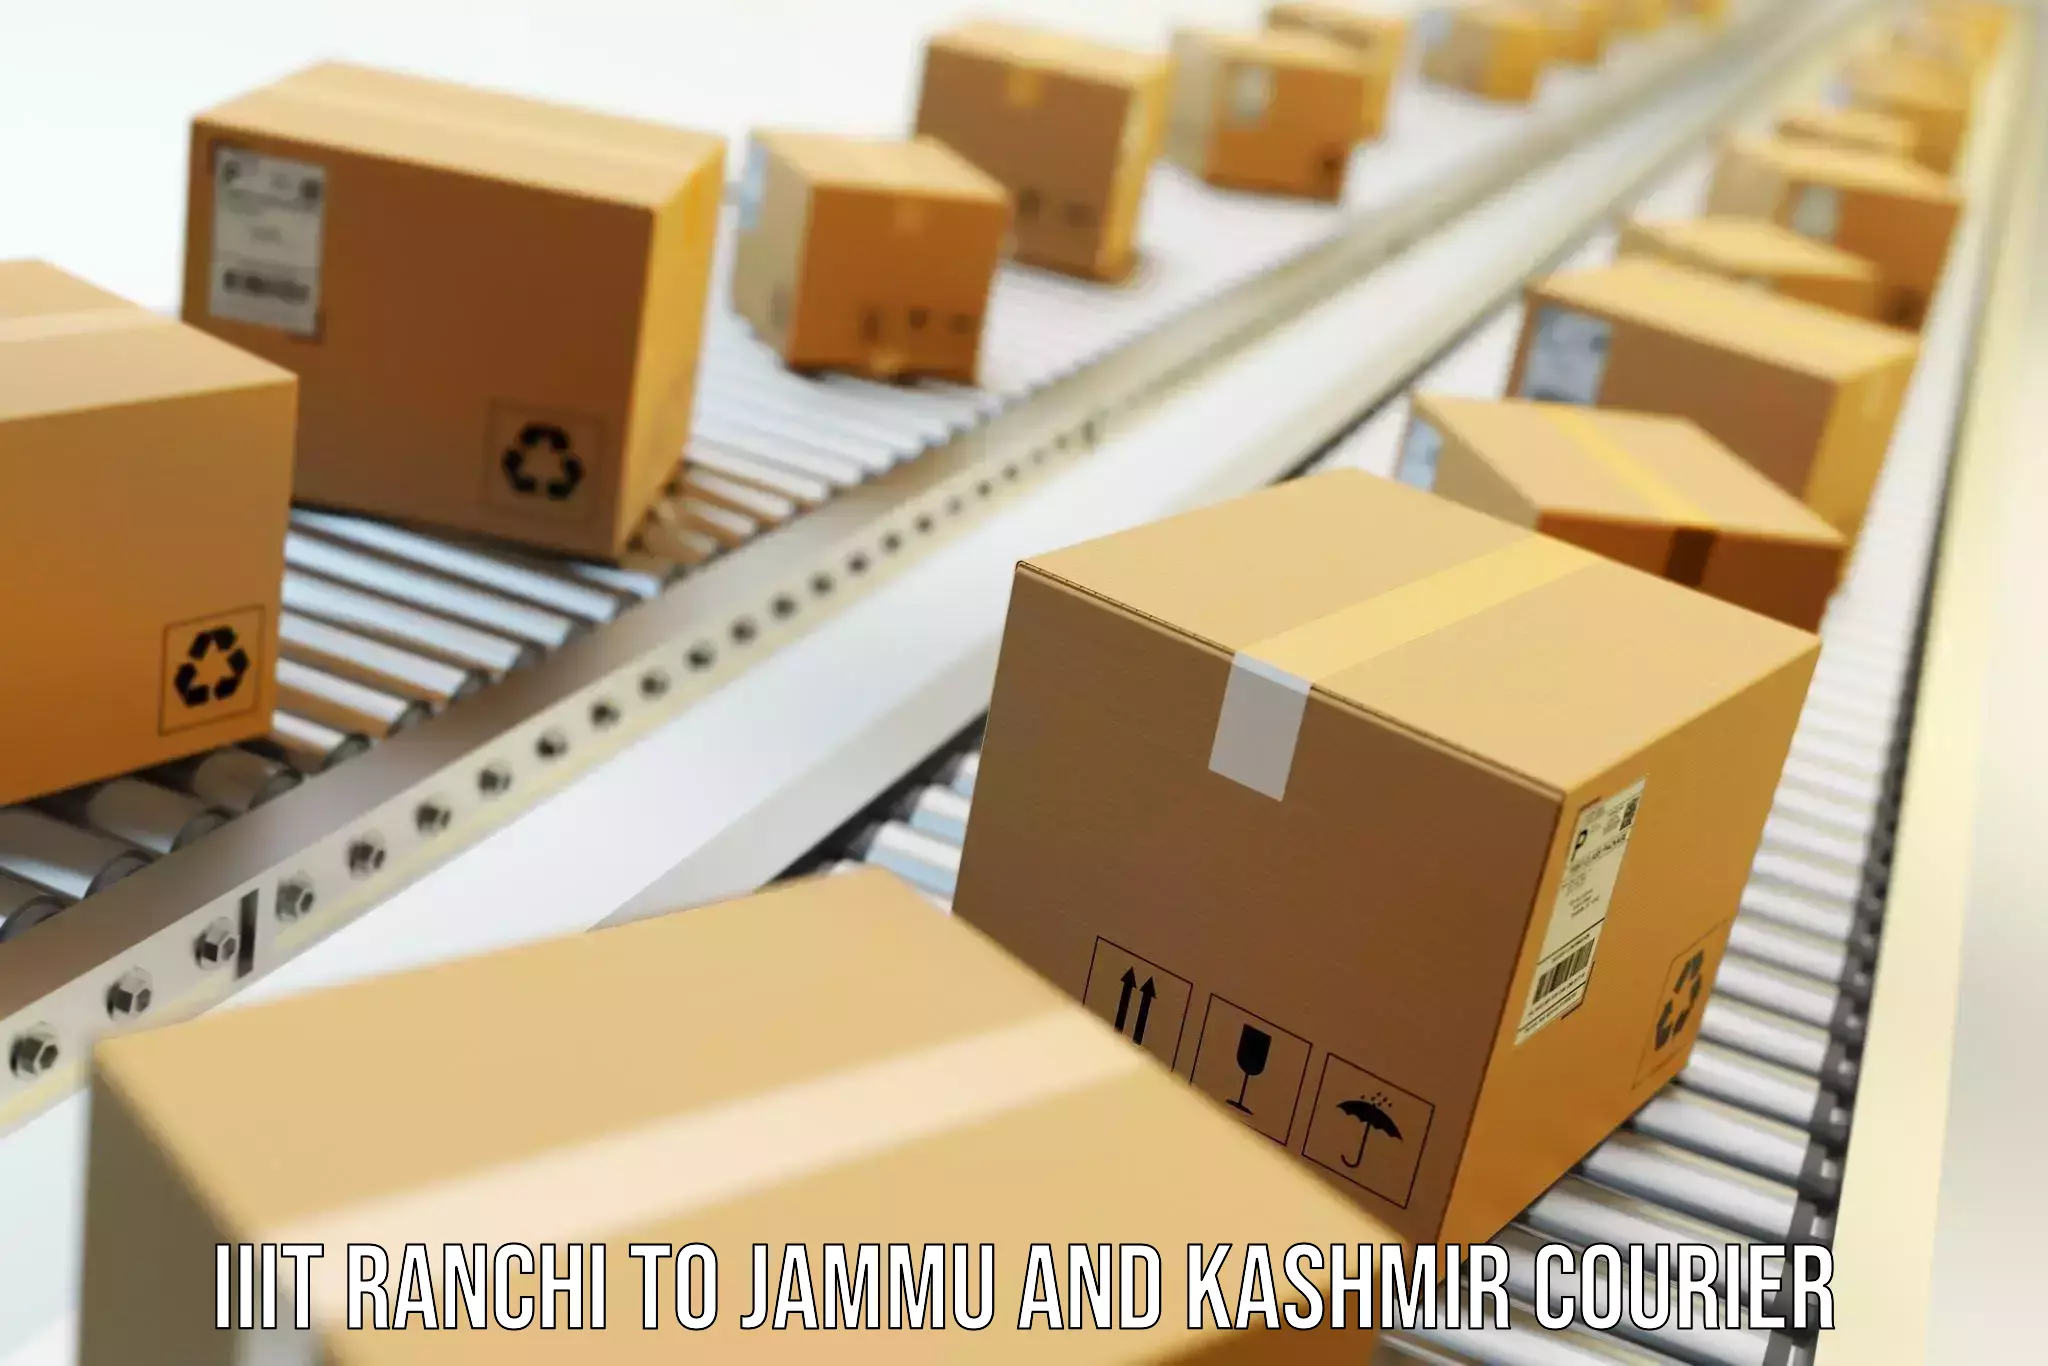 Quality relocation services IIIT Ranchi to Jammu and Kashmir